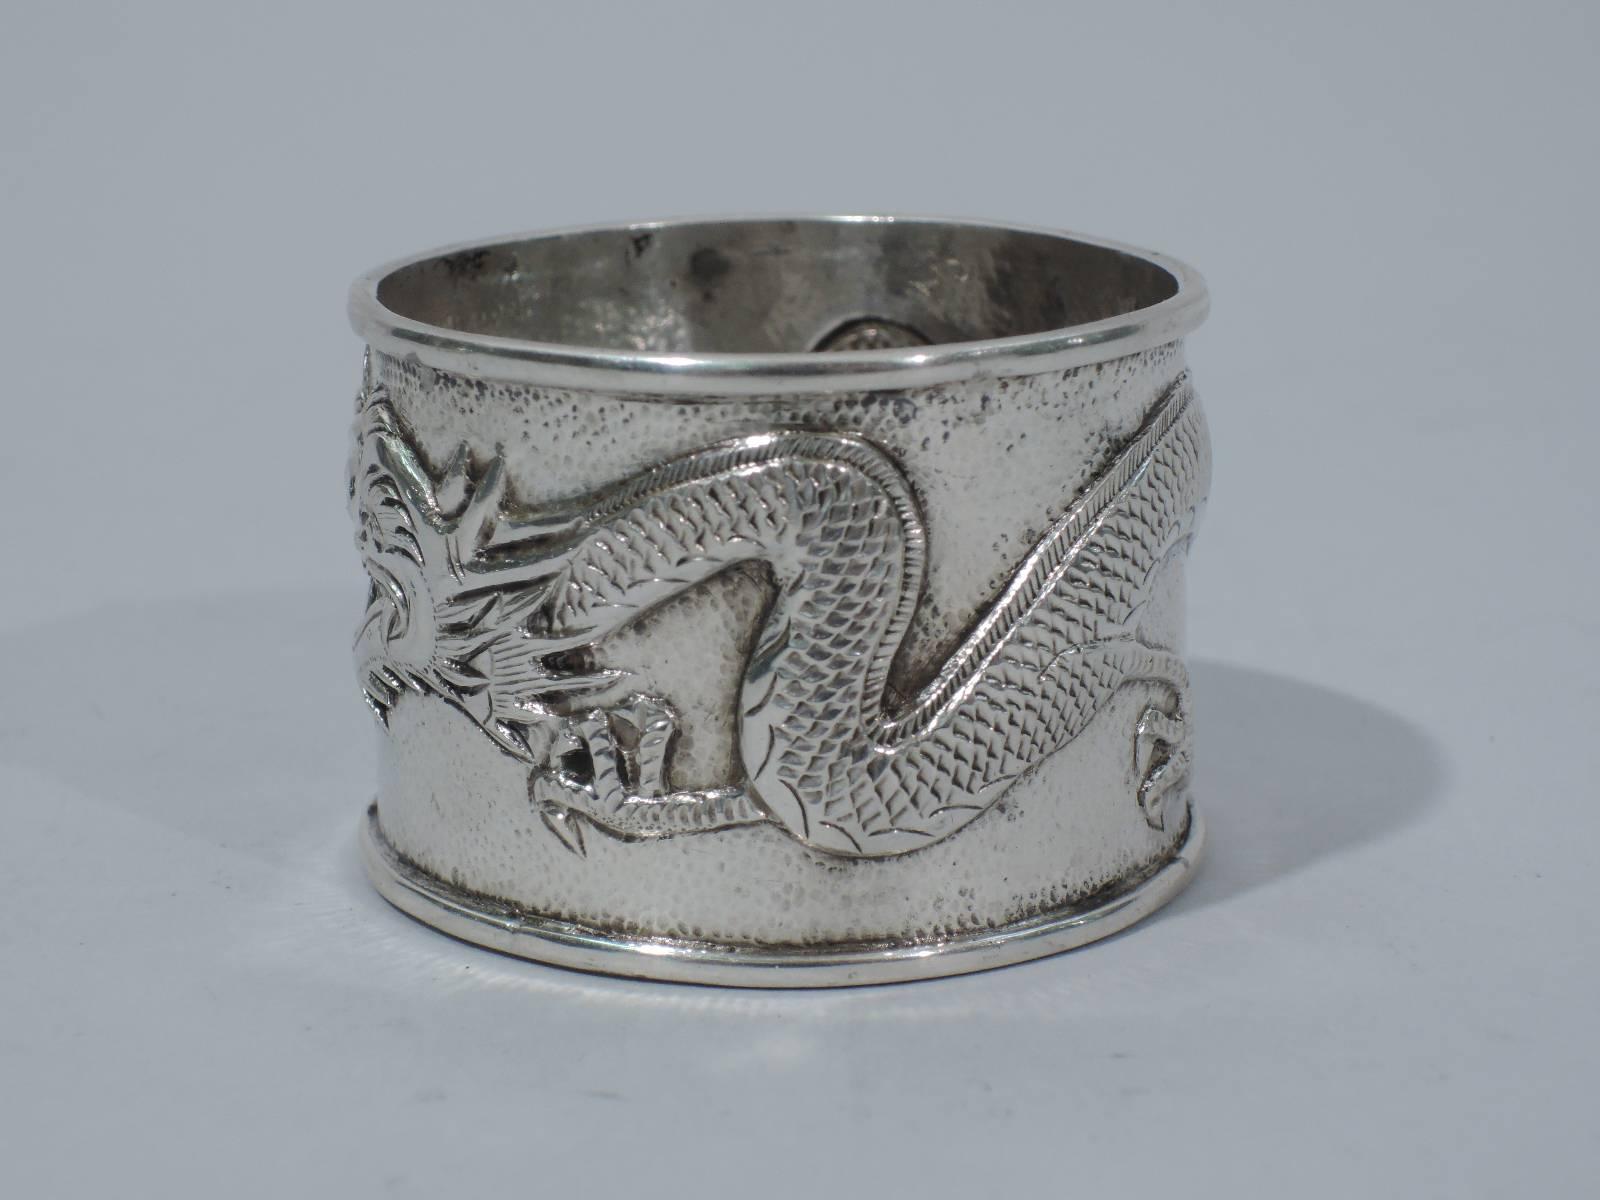 Chinese export silver napkin ring with chased and repousse wraparound dragon on stippled ground. Between snout and tail is circular plate with interlaced monogram BL. Appears to be unmarked. Excellent quality and condition.

Dimensions: H 1 1/4 x